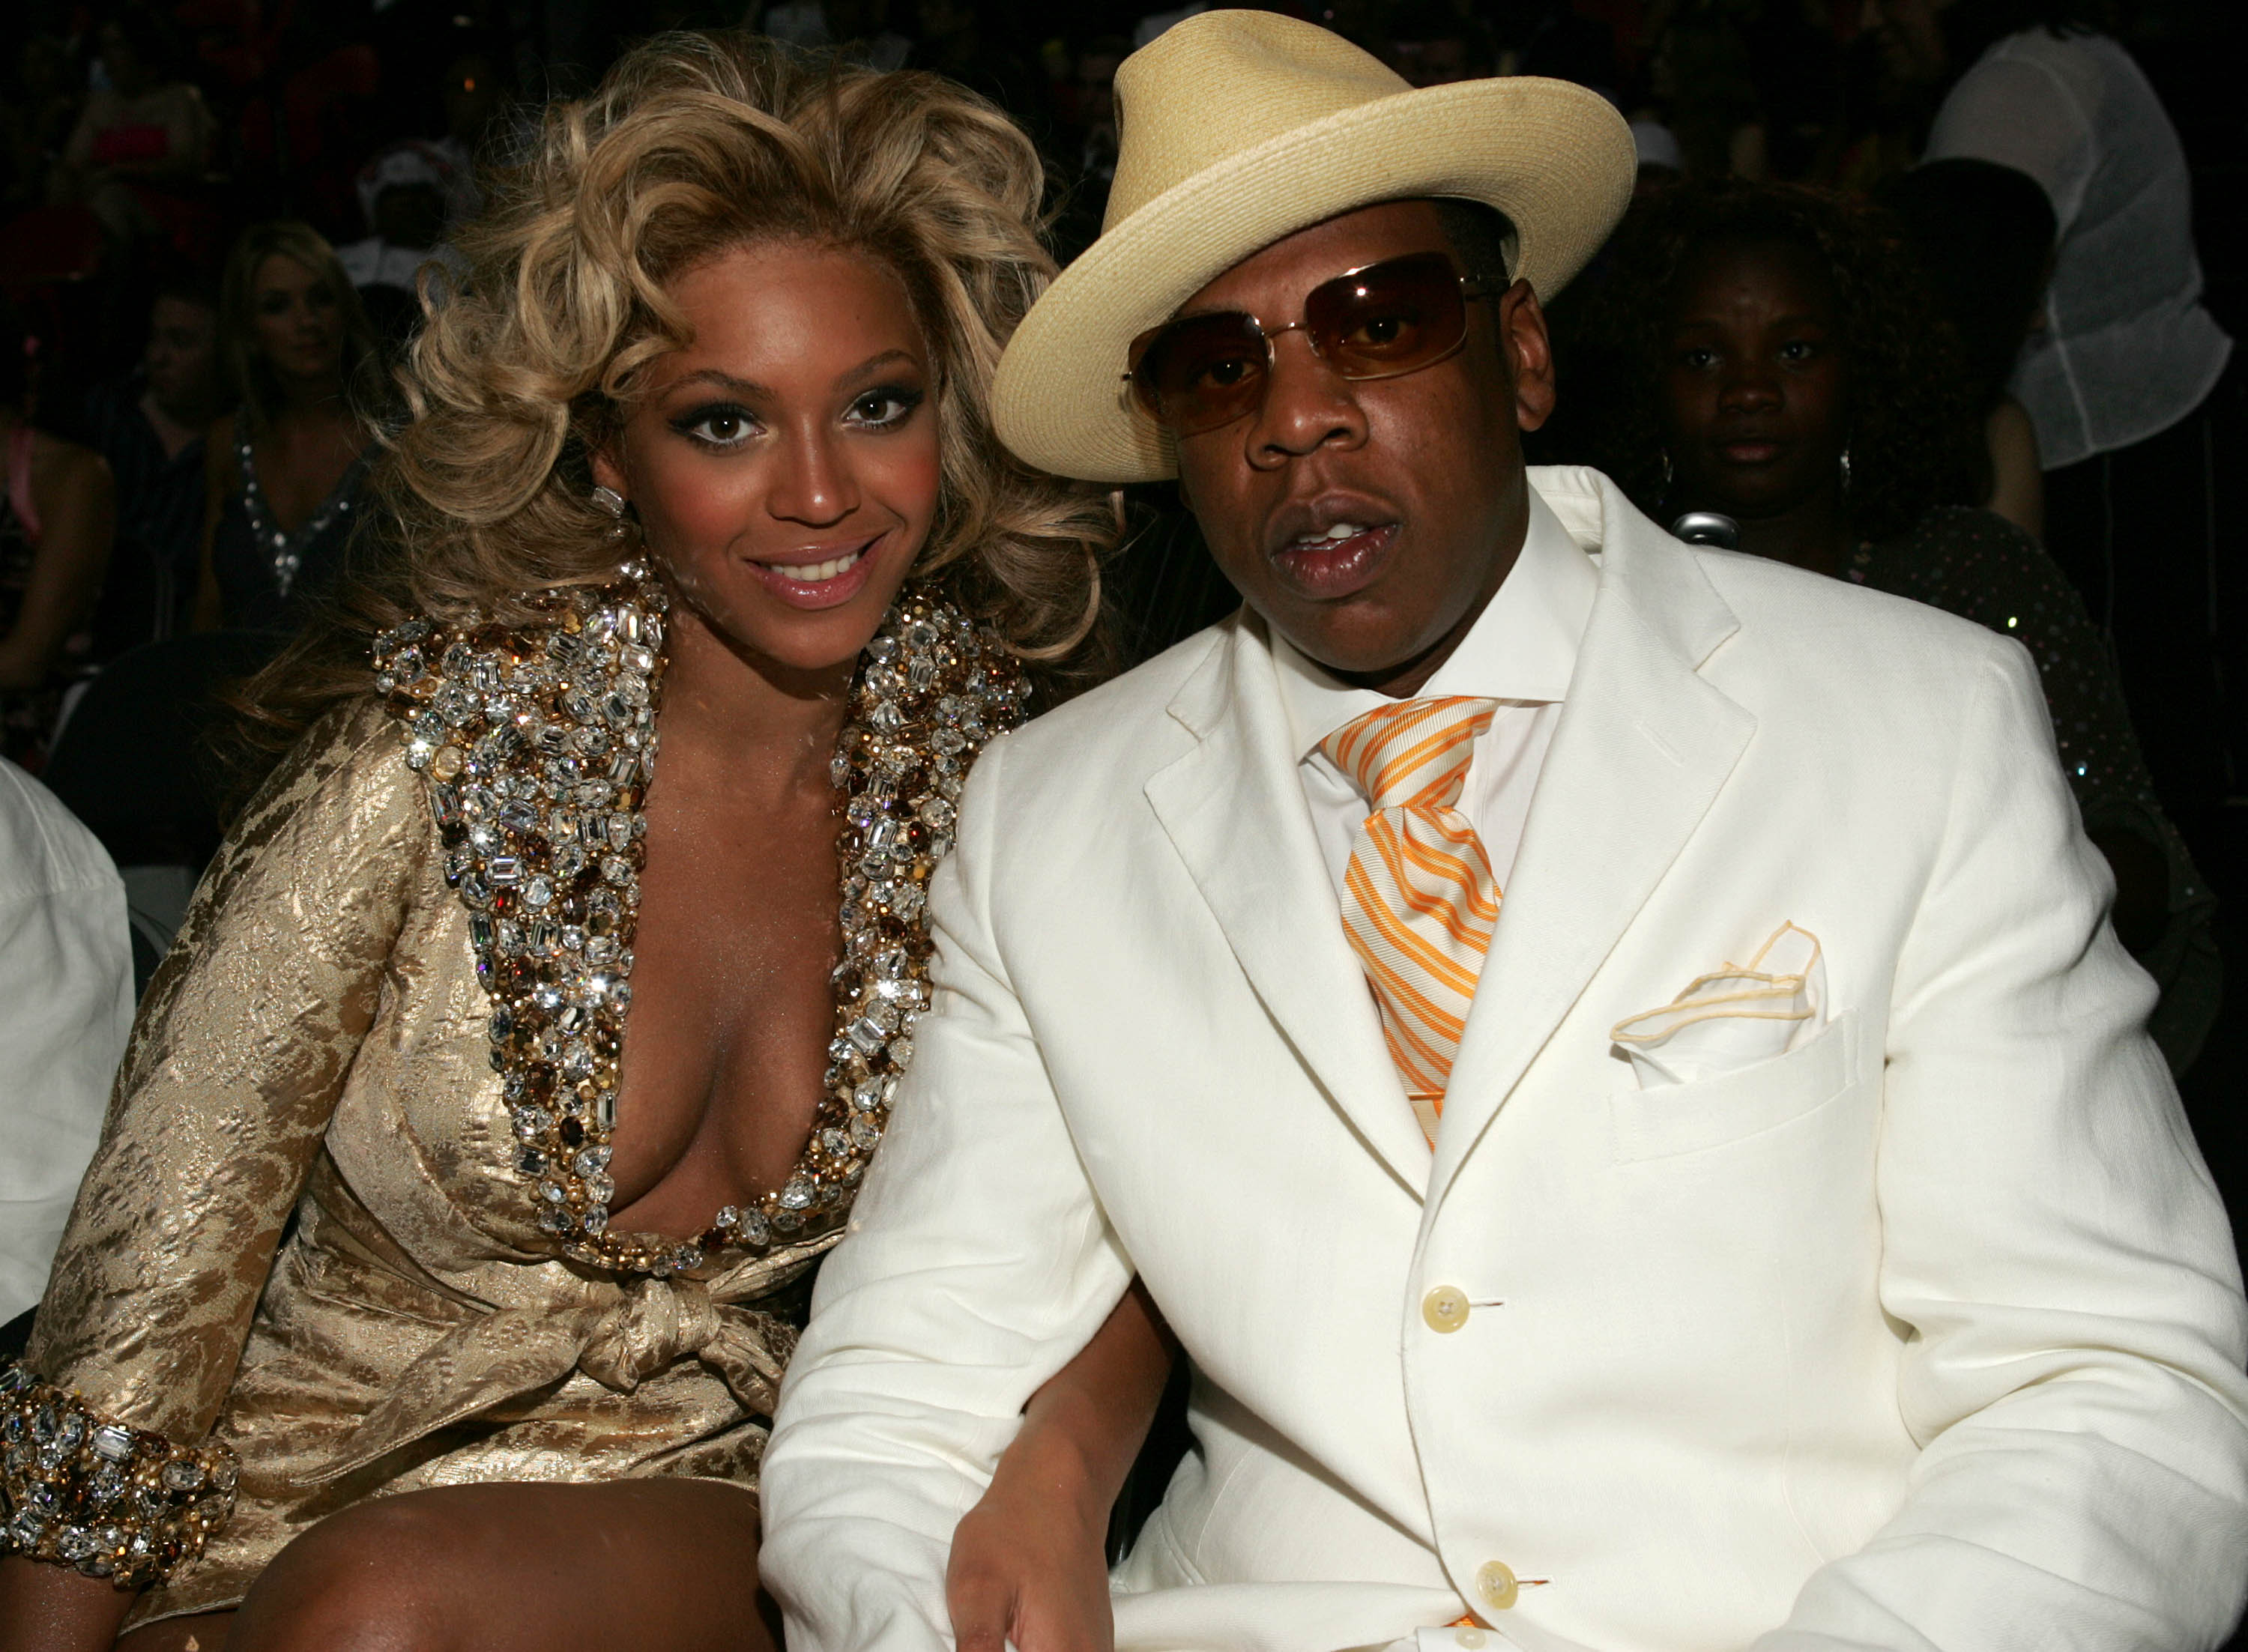 A Timeline Of Beyoncé And JAY-Z's Relationship